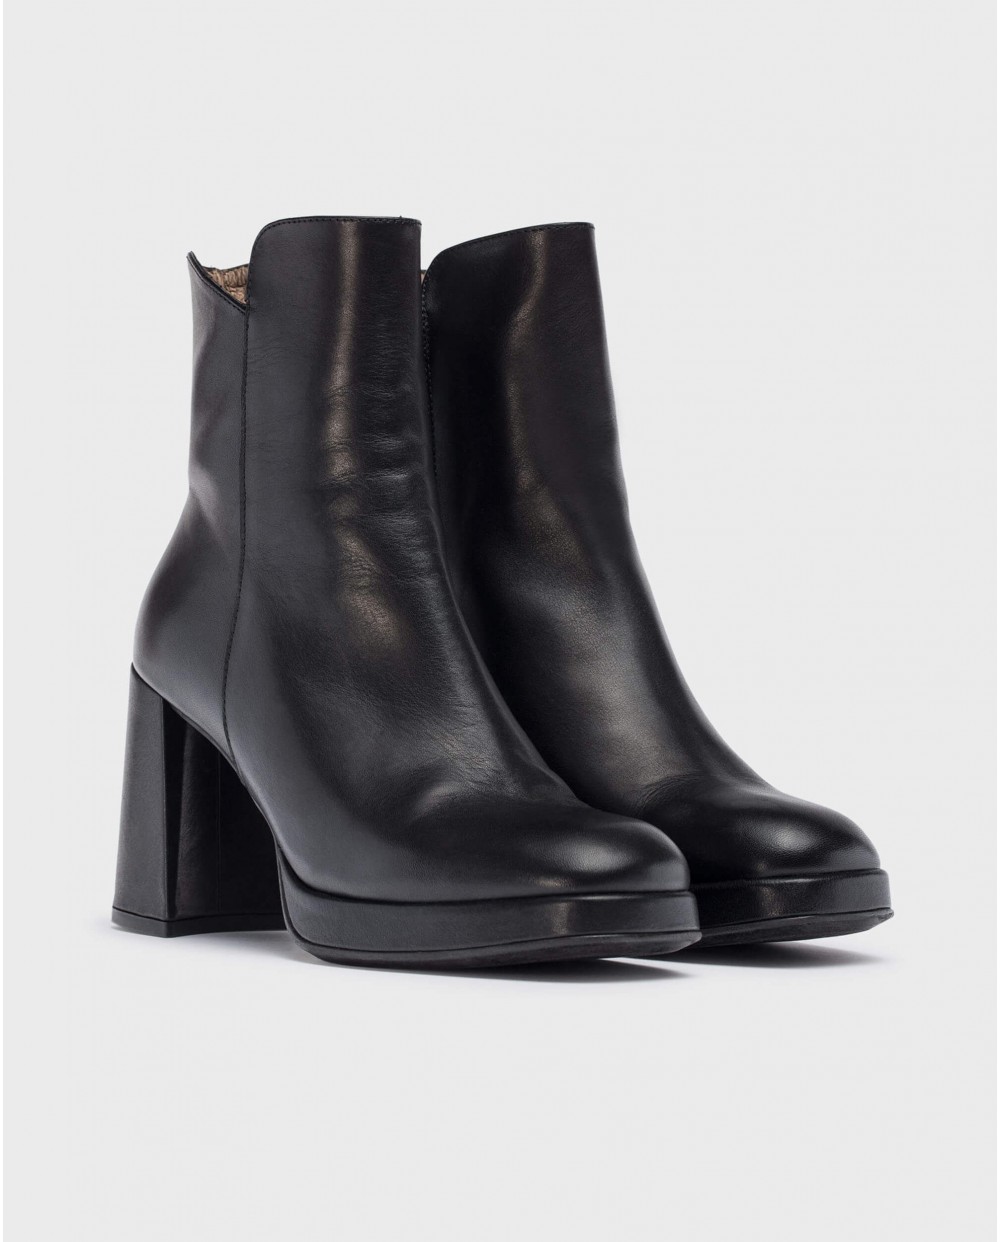 Wonders-Ankle Boots-Black SANTO ankle boot